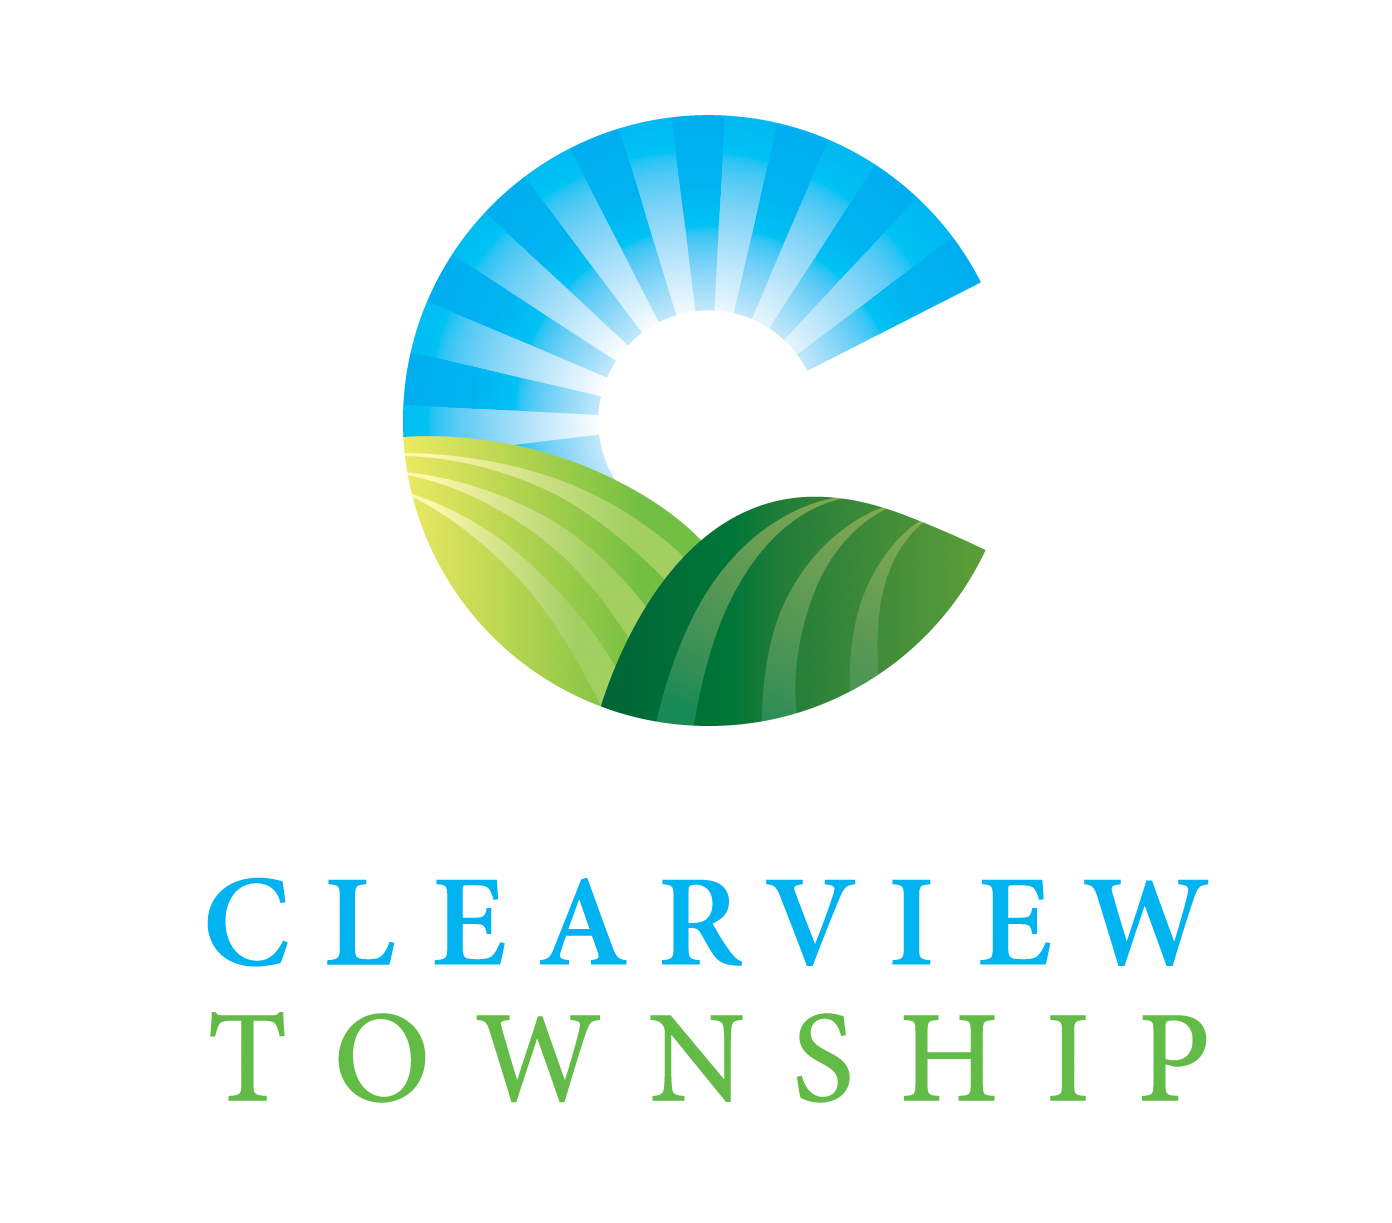 The Township of Clearview